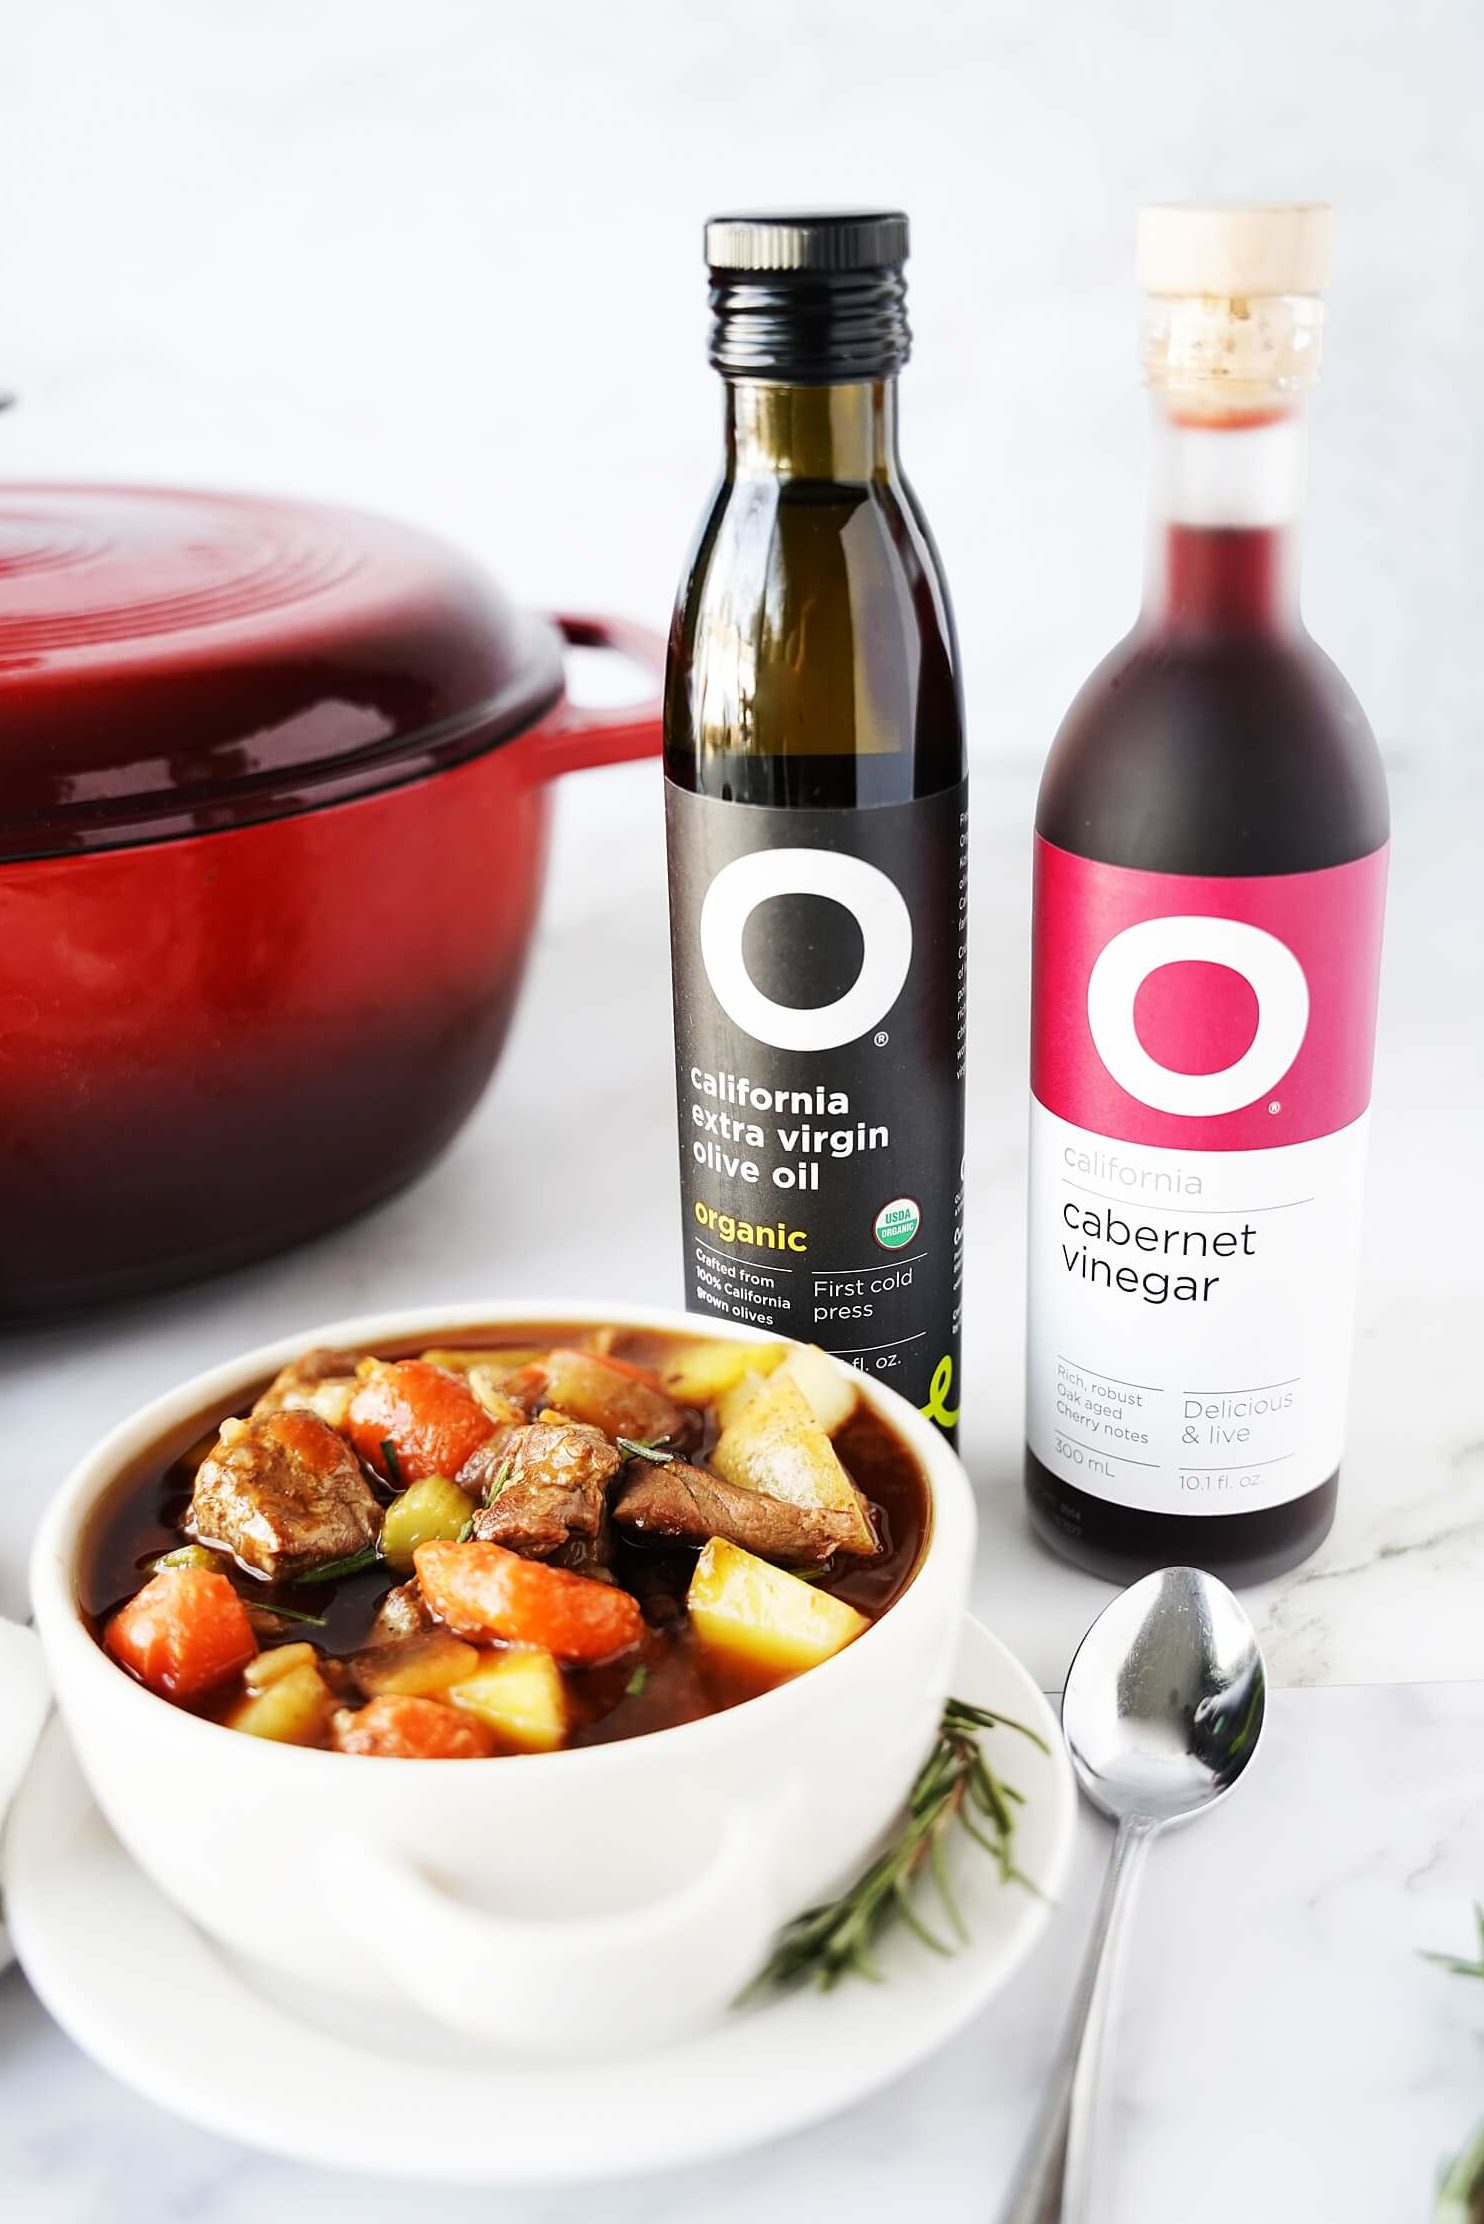 Beef Stew in bowl with pot in background with O Olive Oil bottles